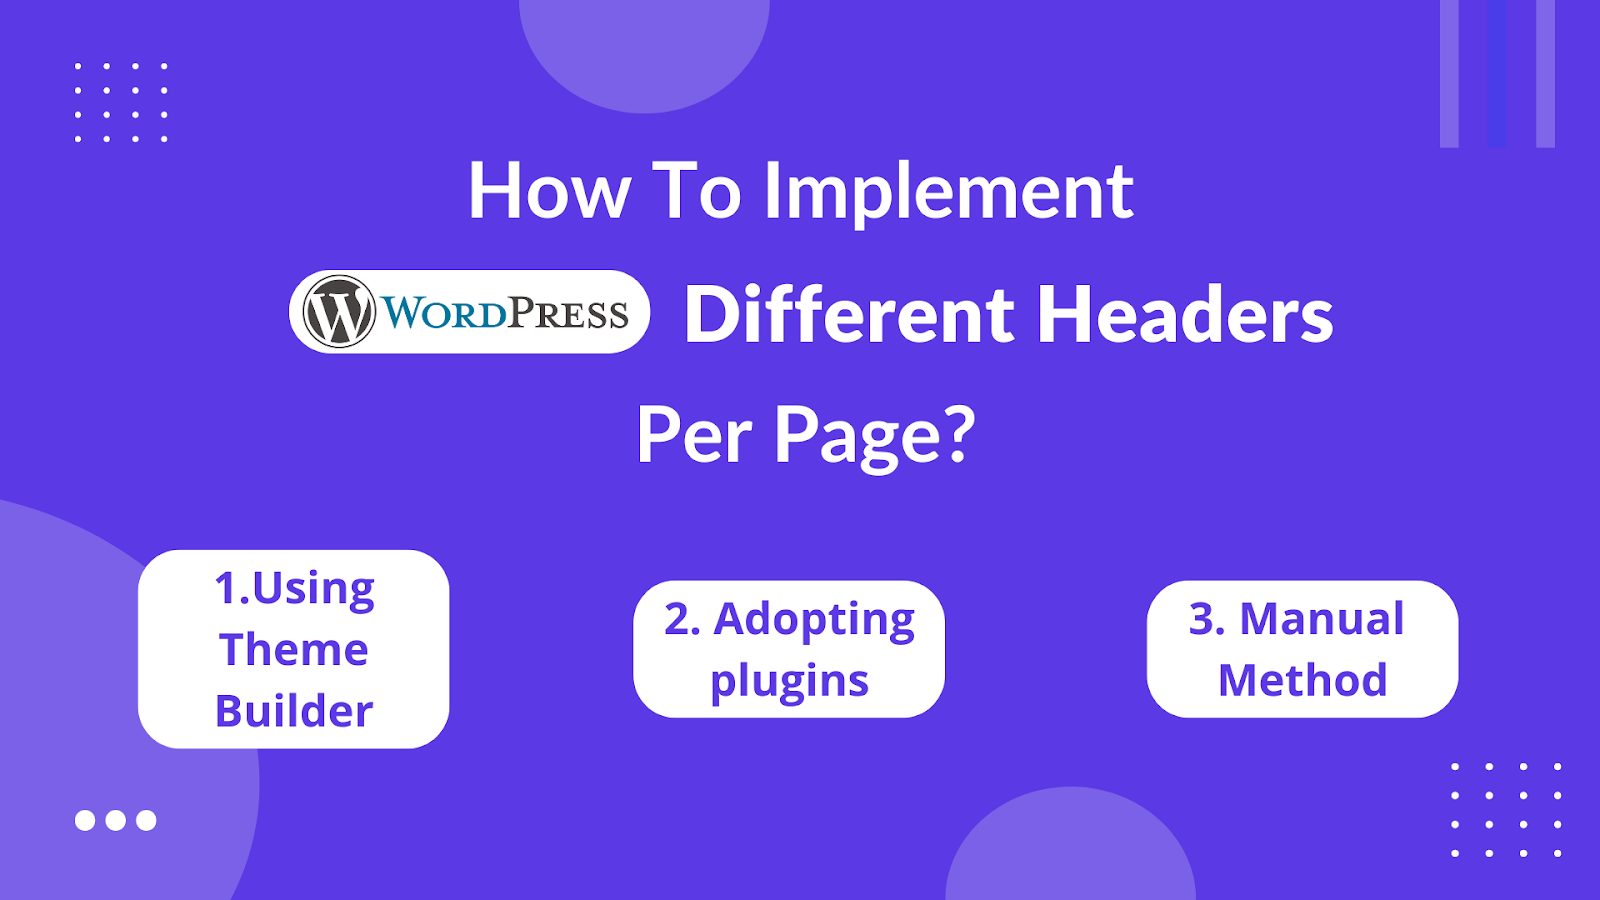 how-to-implement-wordpress-different-headers-per-page-1